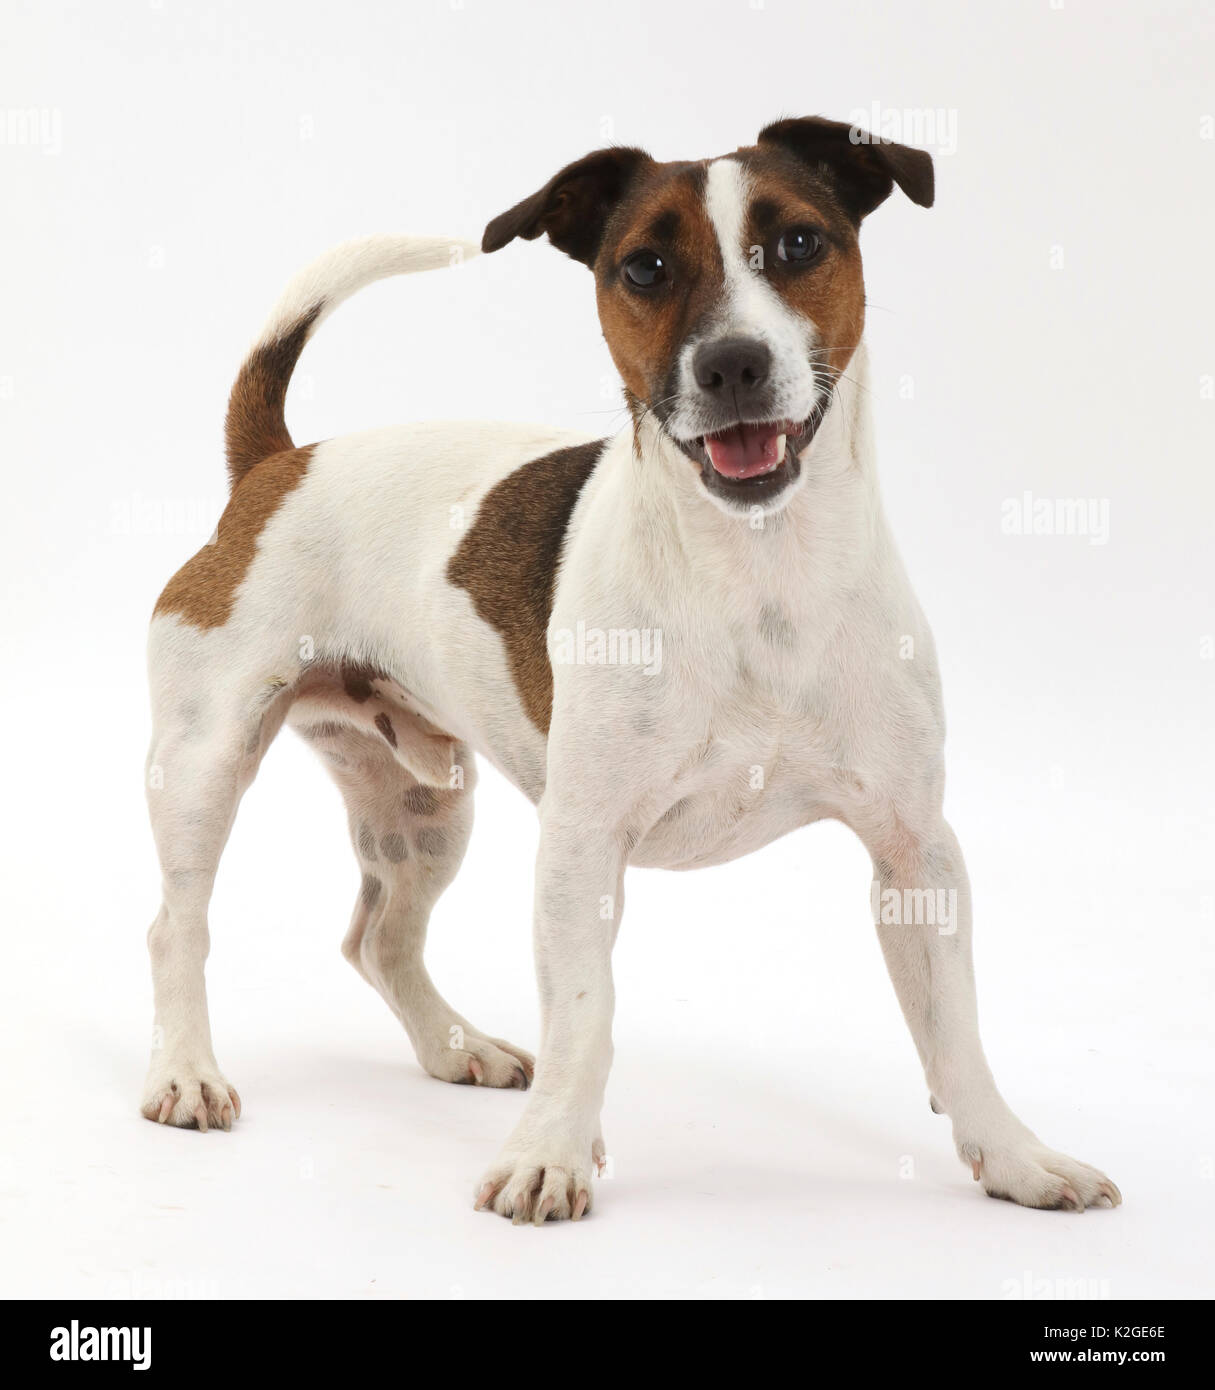 Jack Russell Terrier cane. Foto Stock